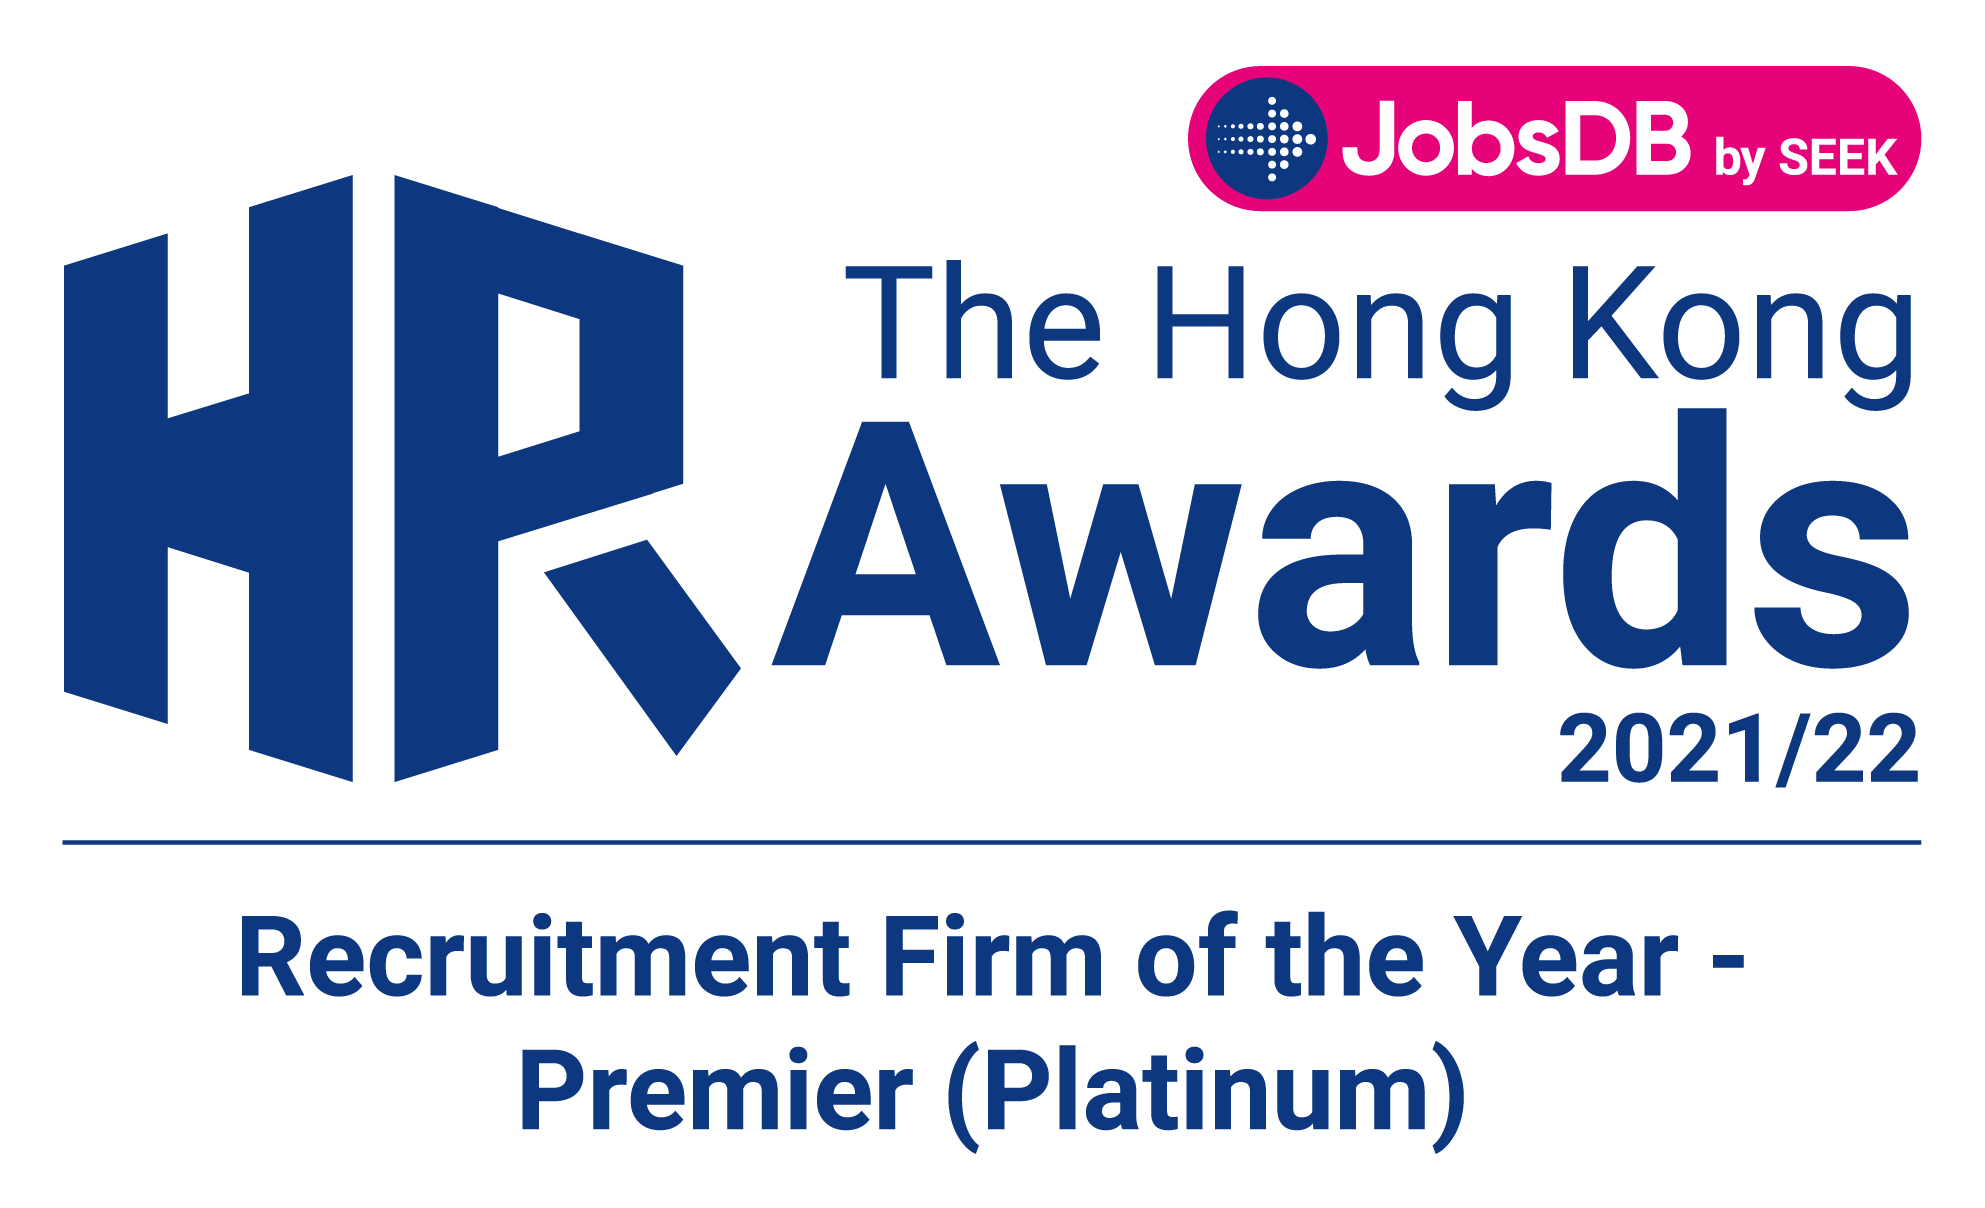 JobsDB Recruitment Firm of the Year